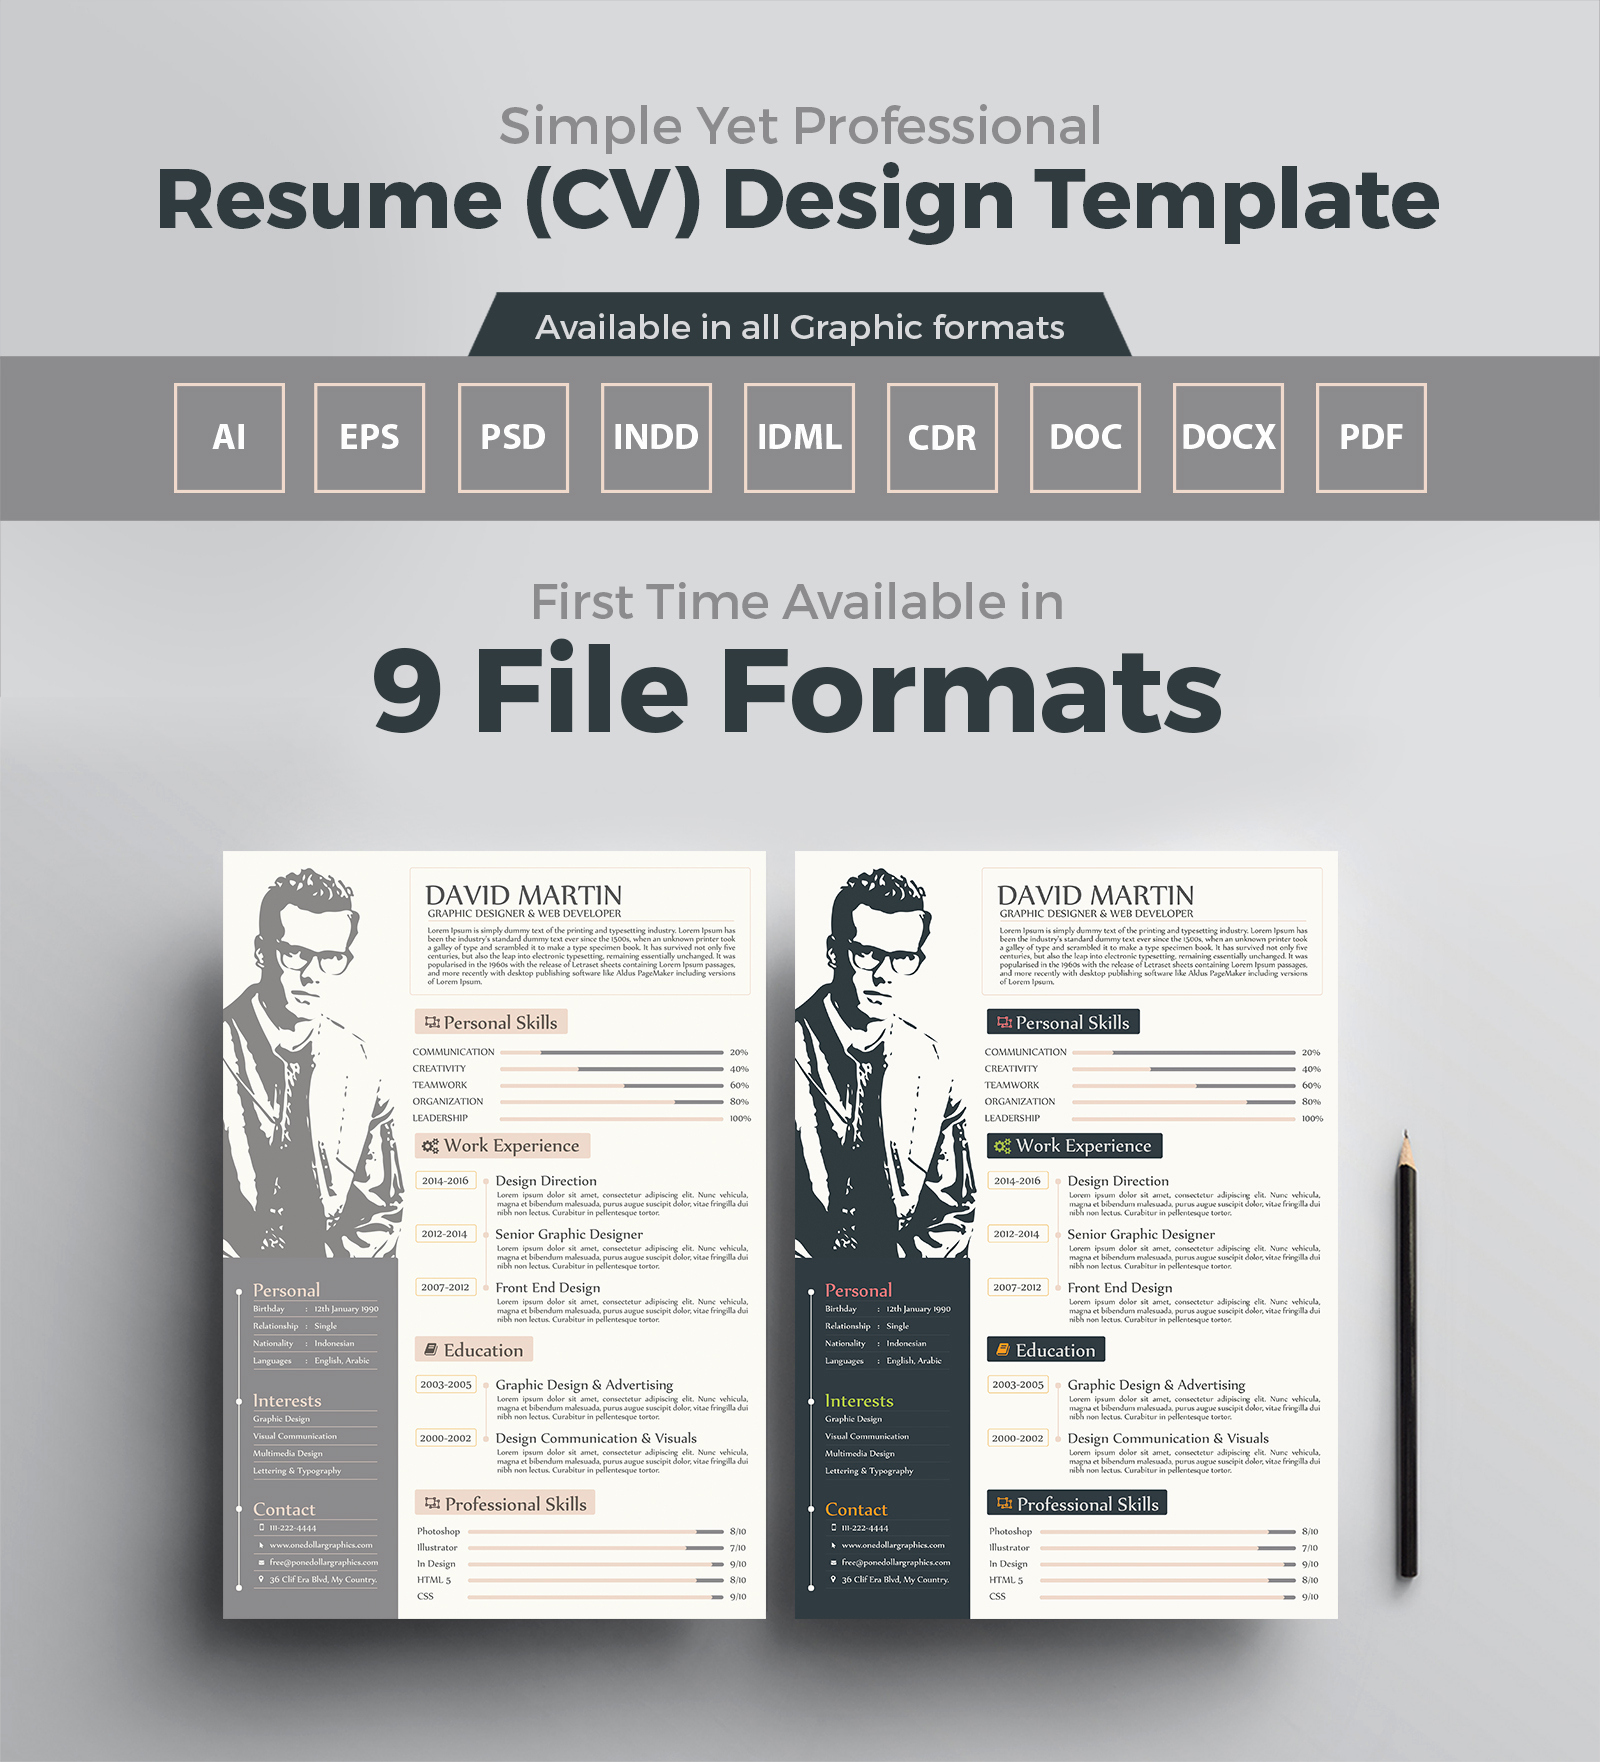 Free Graphic Design Templates Best Of Simple yet Professional Resume Cv Design Templates In Ai